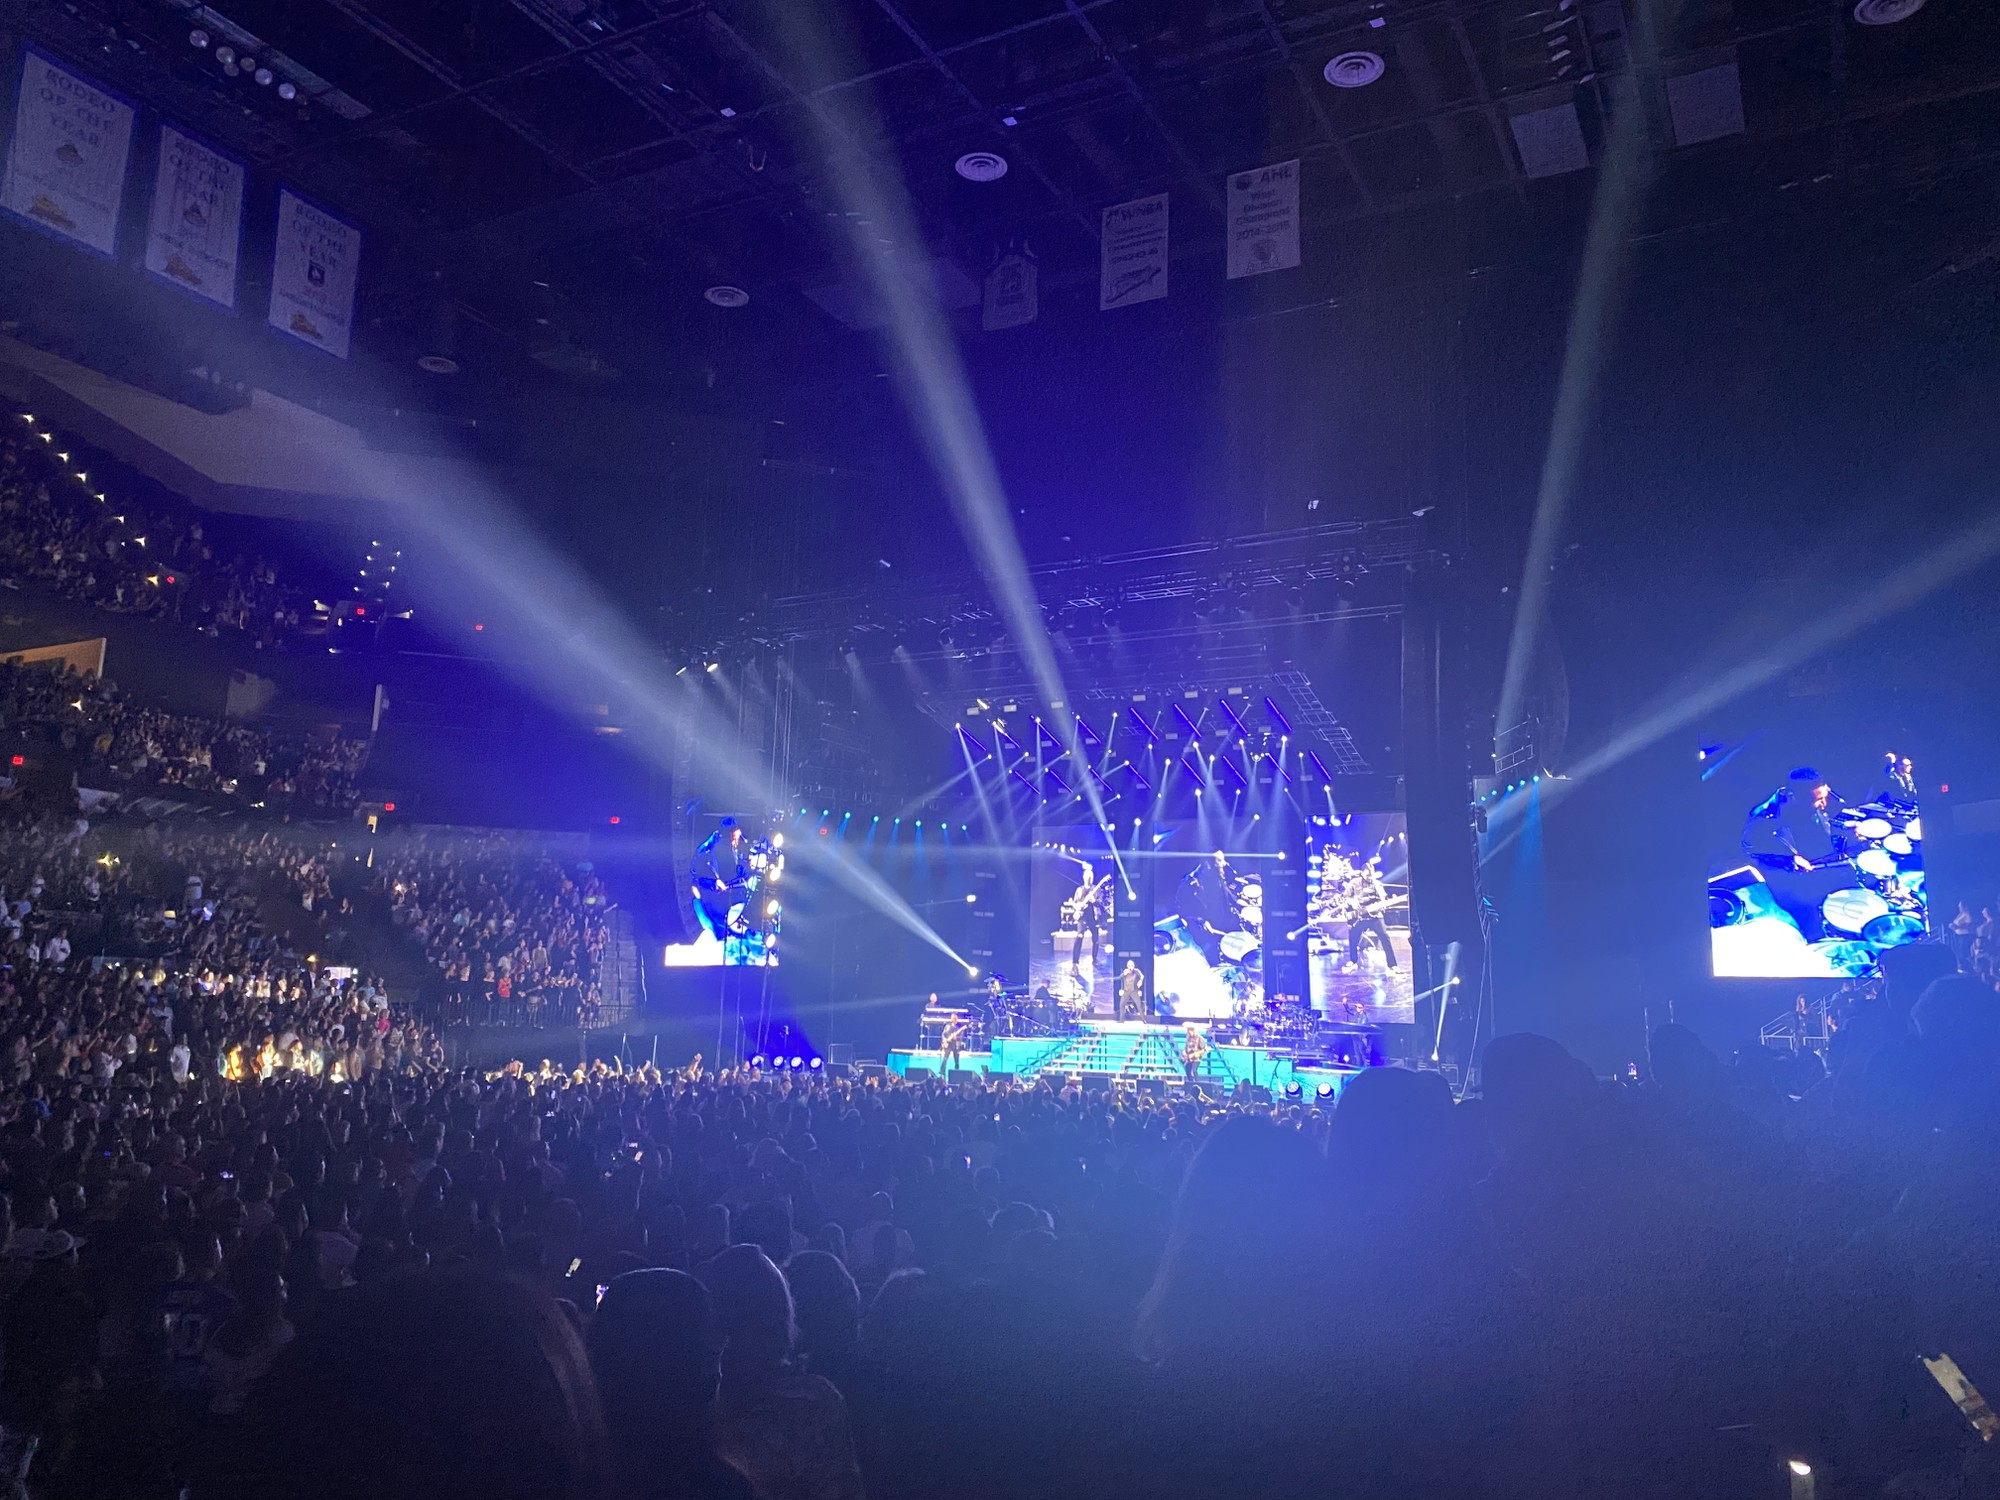 Concert review: Pitbull is still top dog in music industry | The Baylor  Lariat